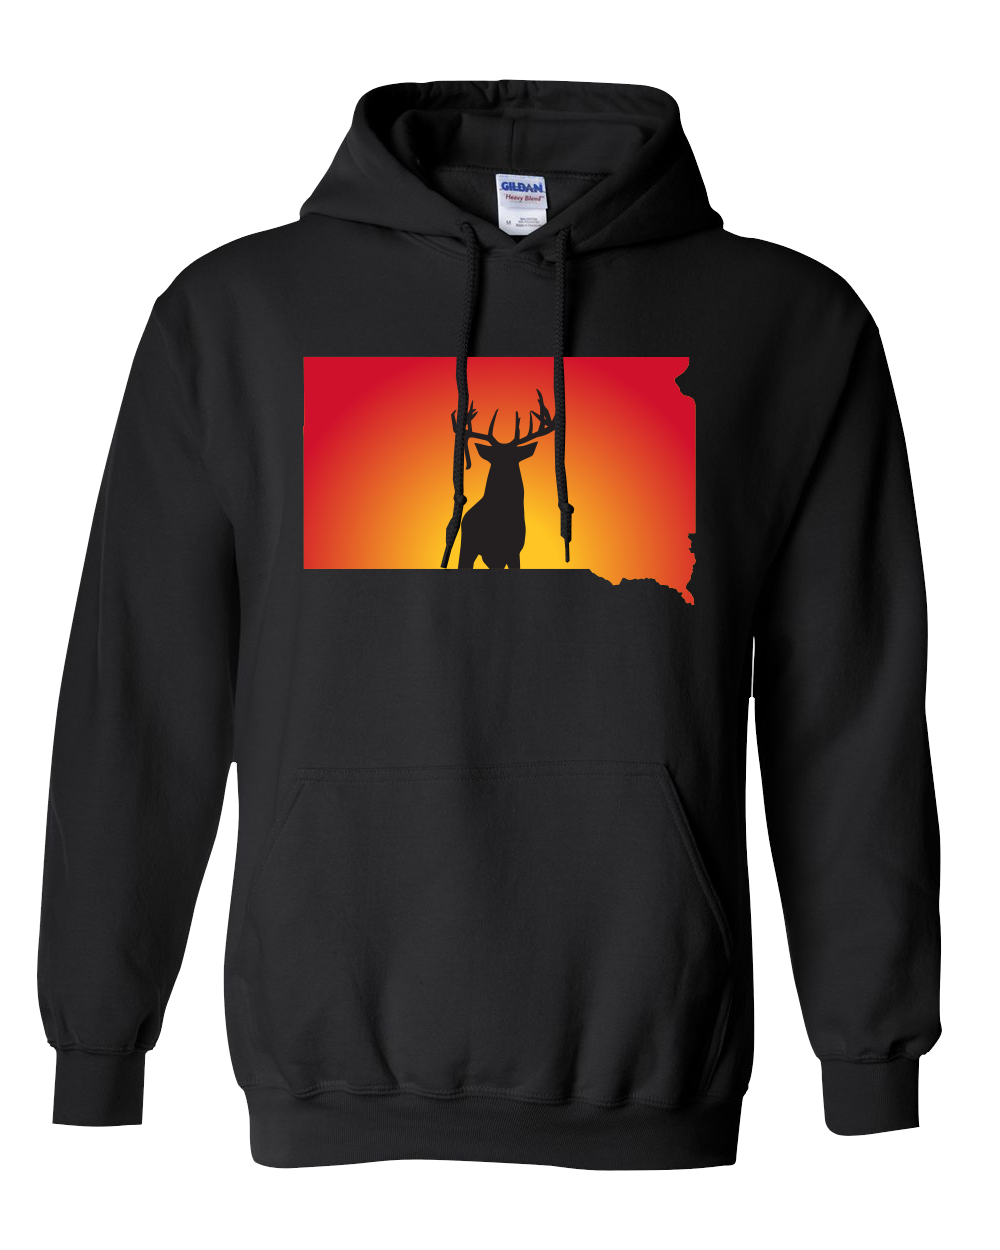 Pullover Hooded Sweatshirt South Dakota Black Whitetail Deer Vibrant Design High Quality Tight Knit Ring Spun Low Maintenance Cotton Printed With The Newest Available Color Transfer Technology